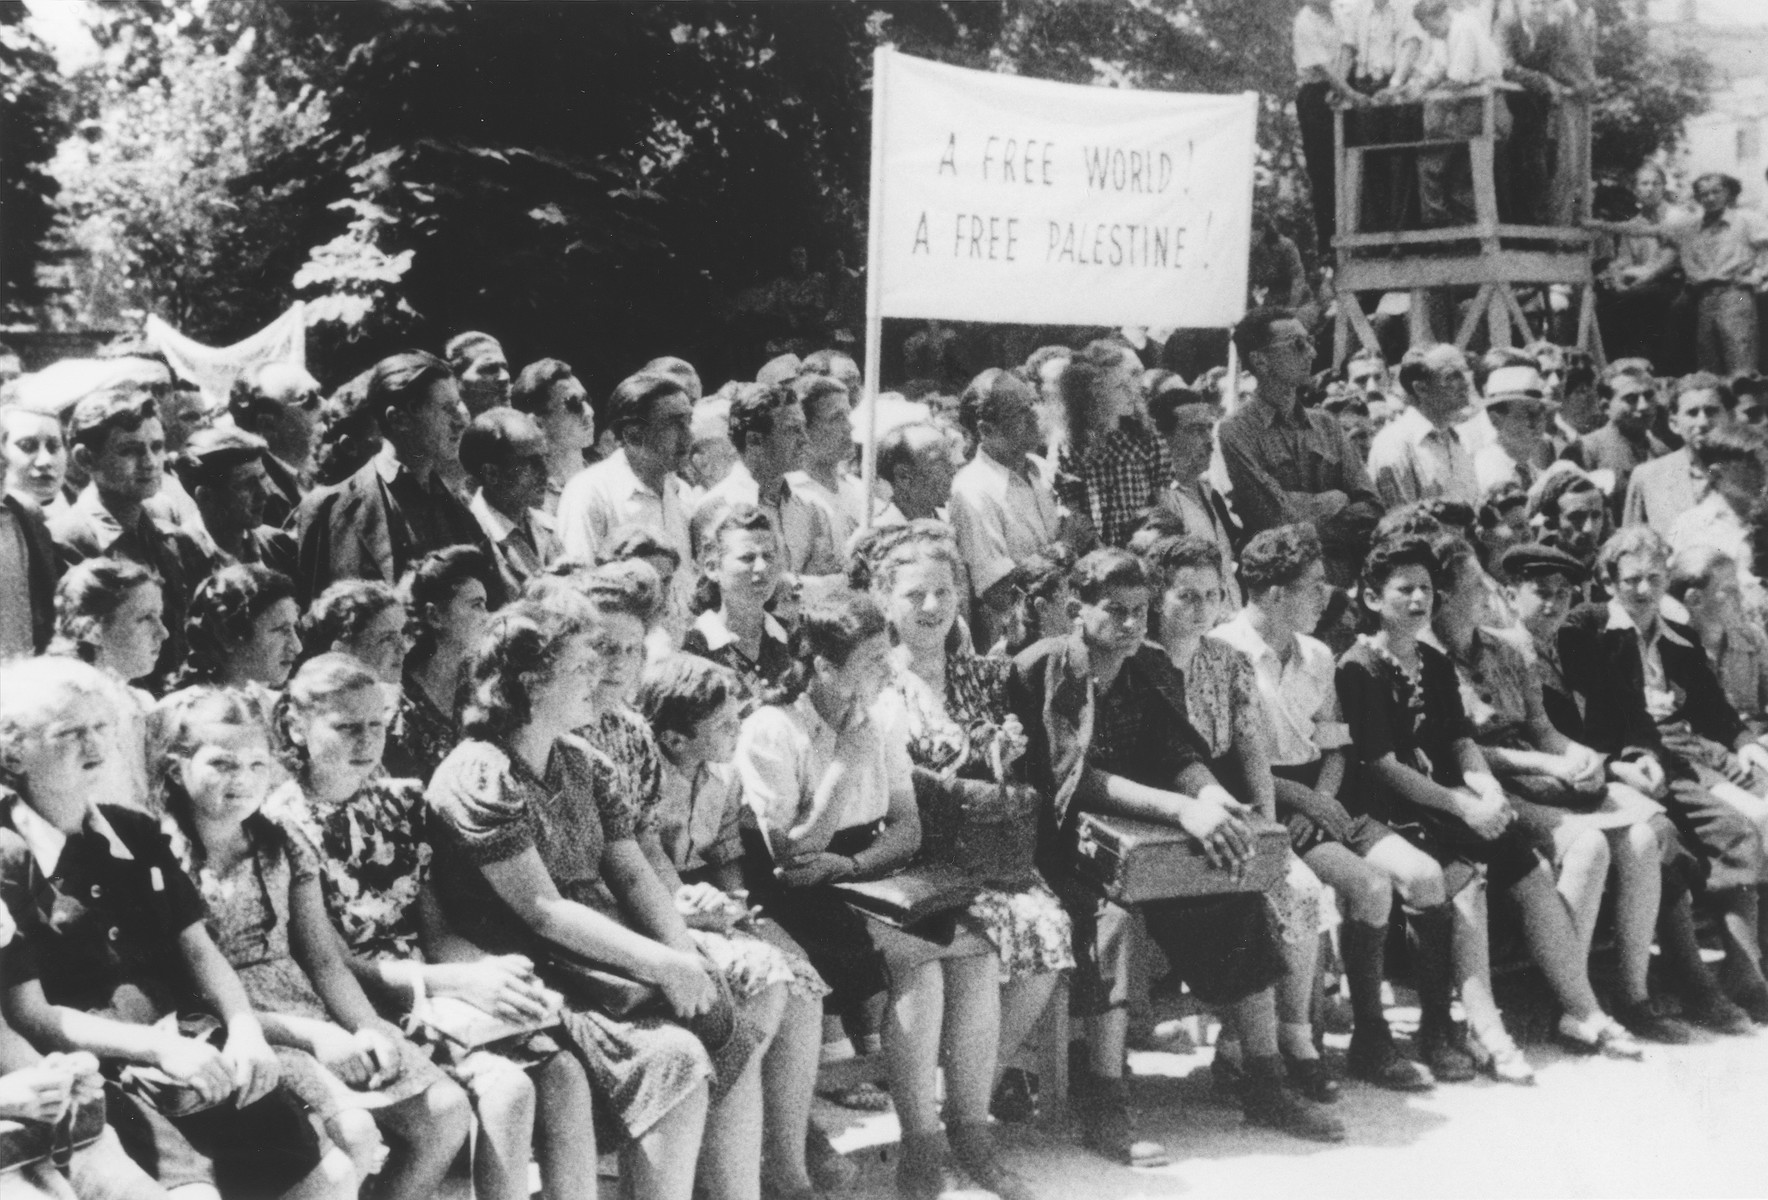 Students at a school for Jewish DPs in Munich, attend a demonstration calling for free immigration to Palestine.

Among those pictured is Ellen Griliches (front row, third from the left).